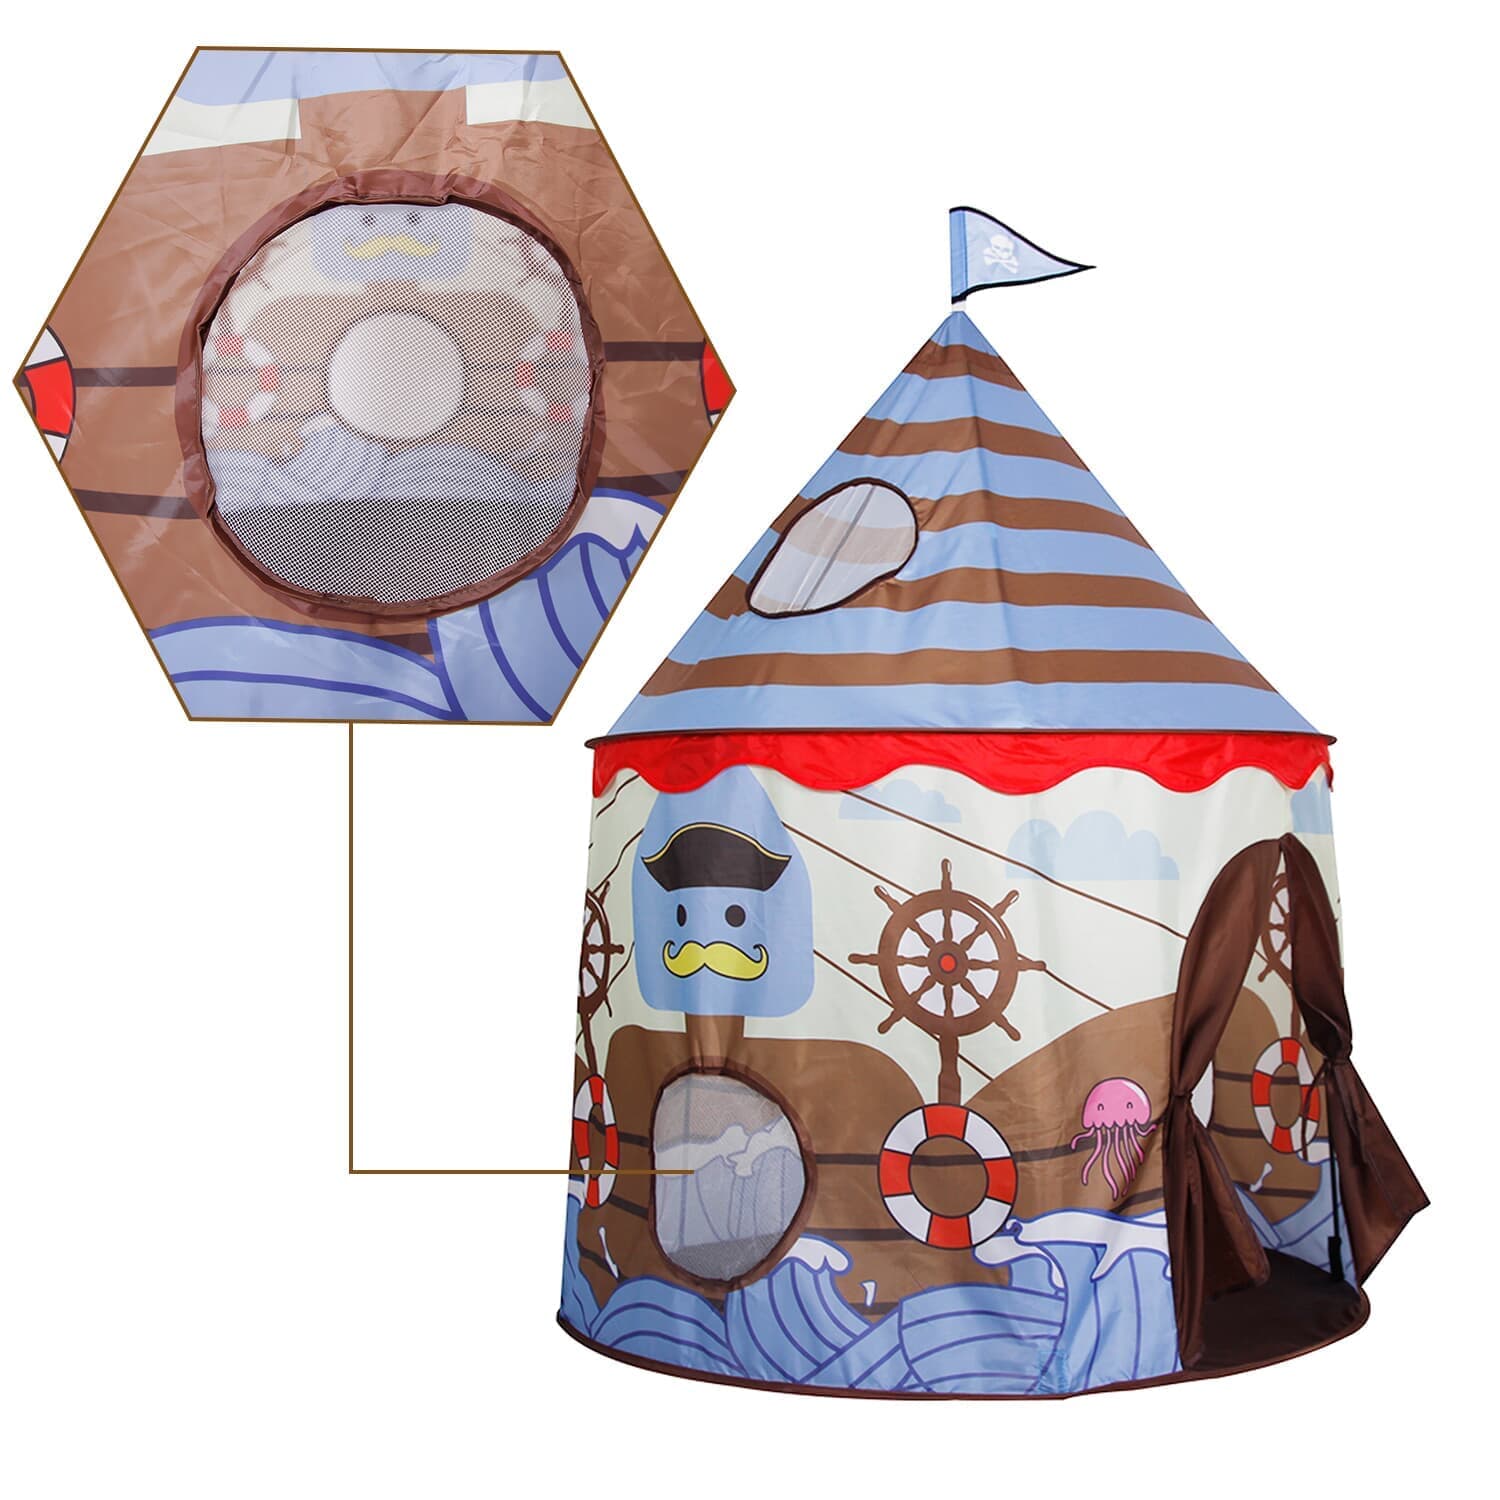 Homfu Castle Playhouse Pop Up Indoor Outdoor Toy Kids Play Tent For Children Gift With Viking Pattern Homfu Castle Playhouse Pop Up Indoor Outdoor Toy Kids Play Tent For Children Gift With Viking Pattern 45.72